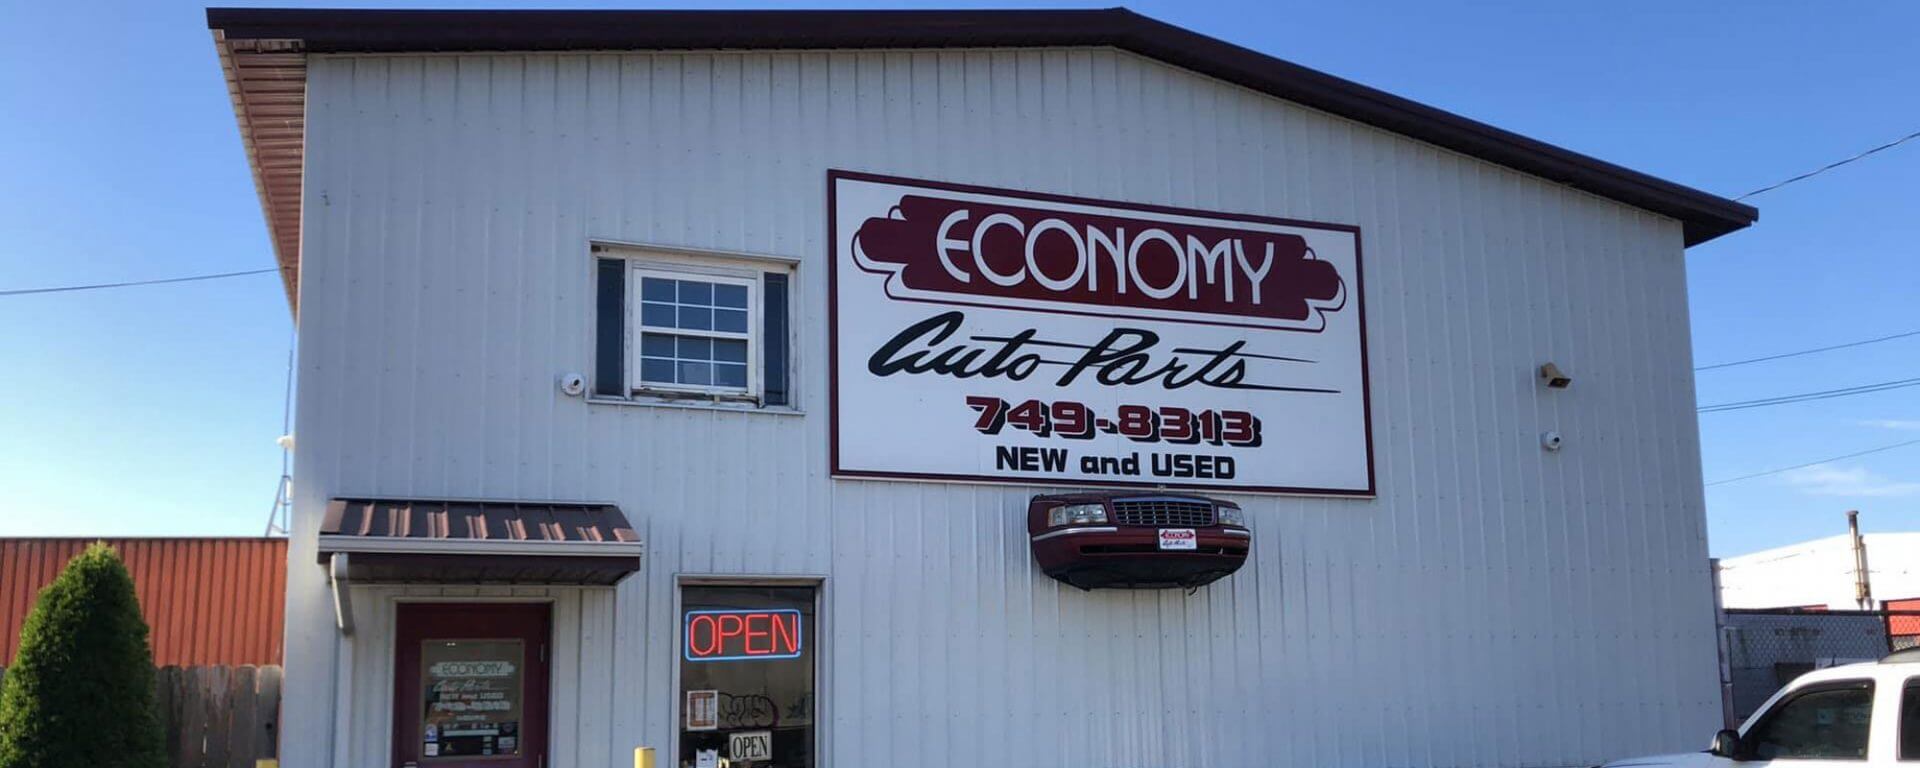 New and Used Auto Parts at Economy Auto Parts